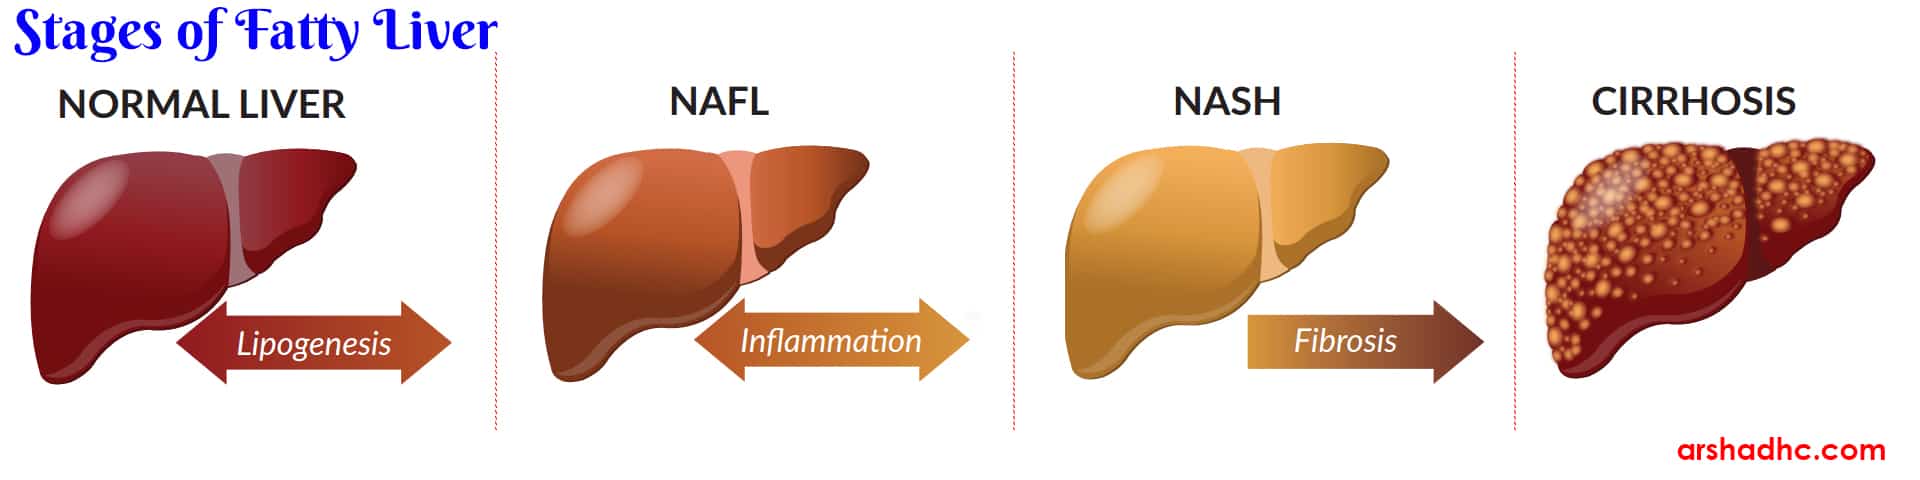 fatty liver stages